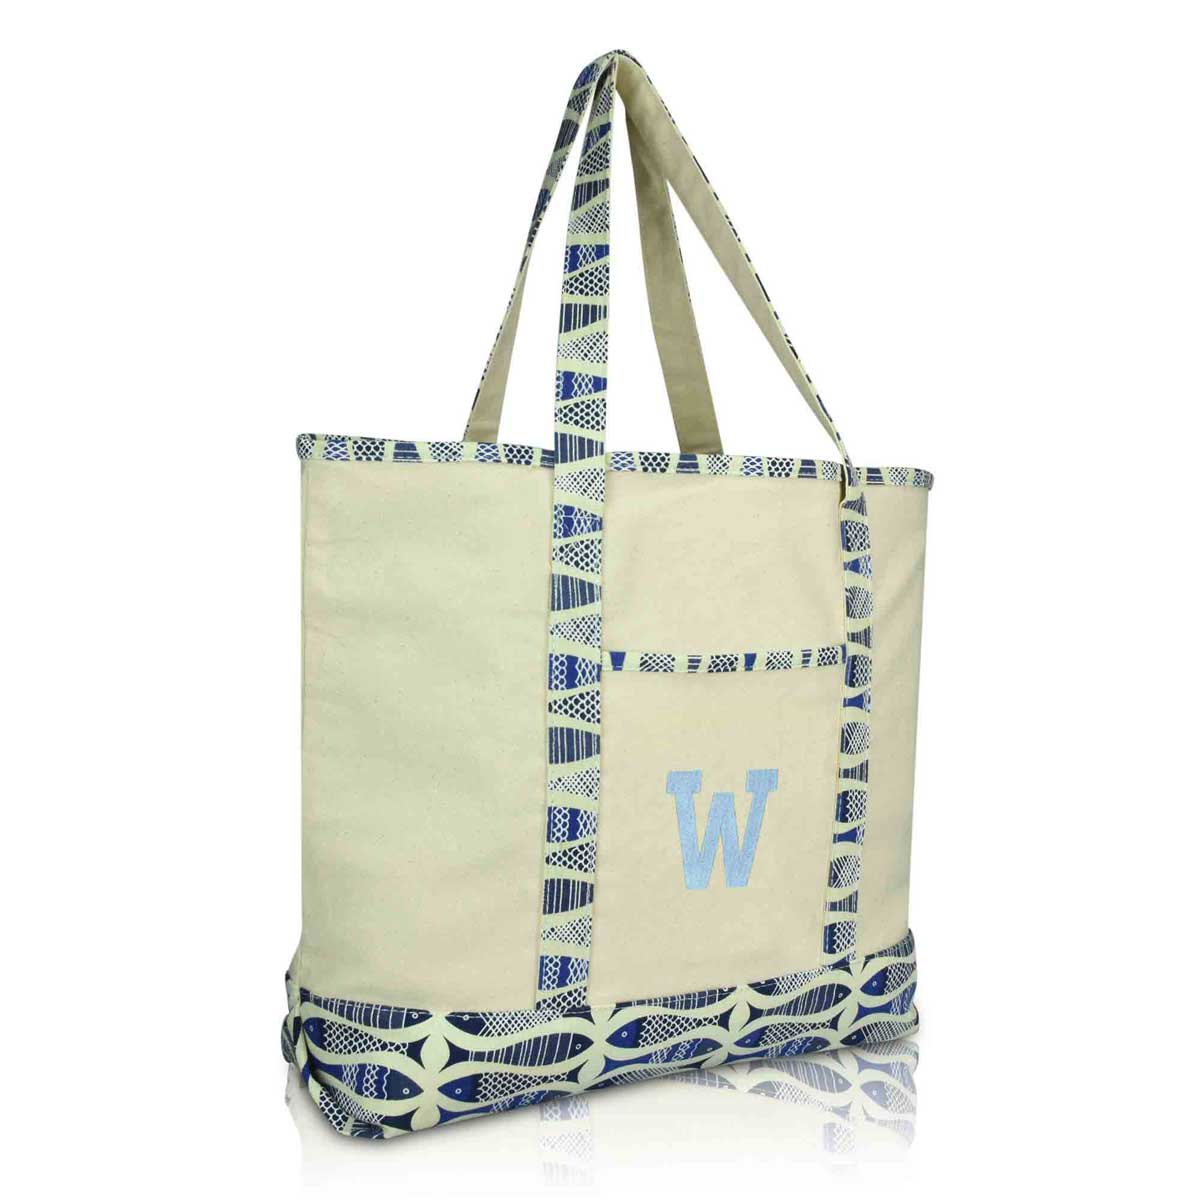 Dalix Initial Tote Bag Personalized Monogram Zippered Top Letter - W